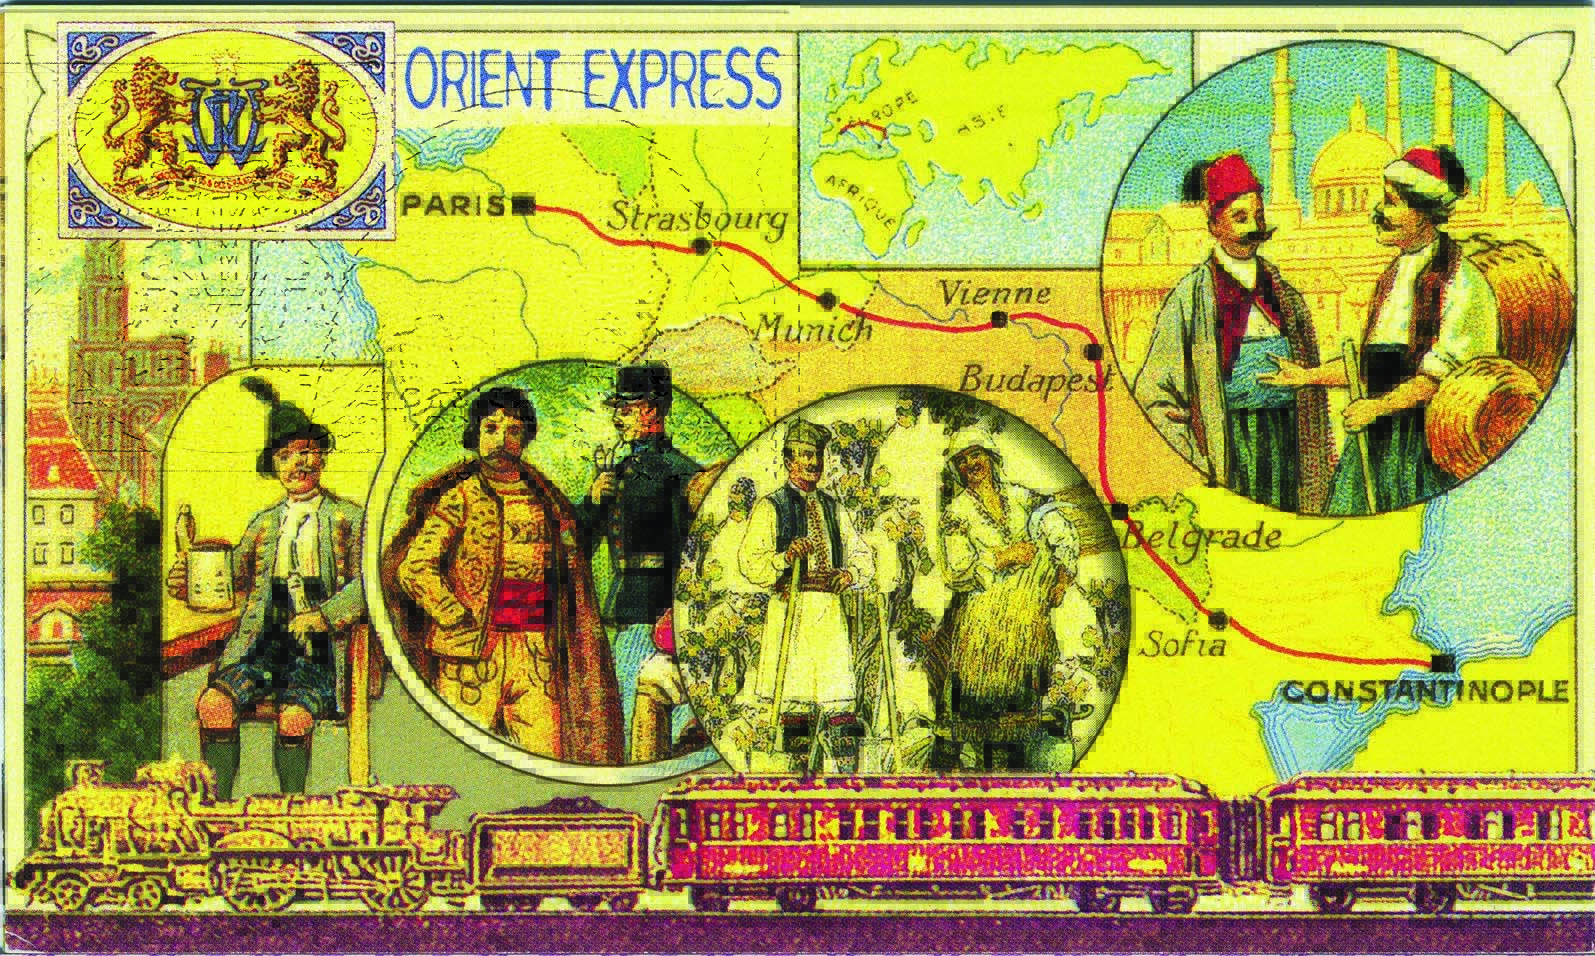 Sirkeci Train Station and some European destinations are depicted for travellers of the time.